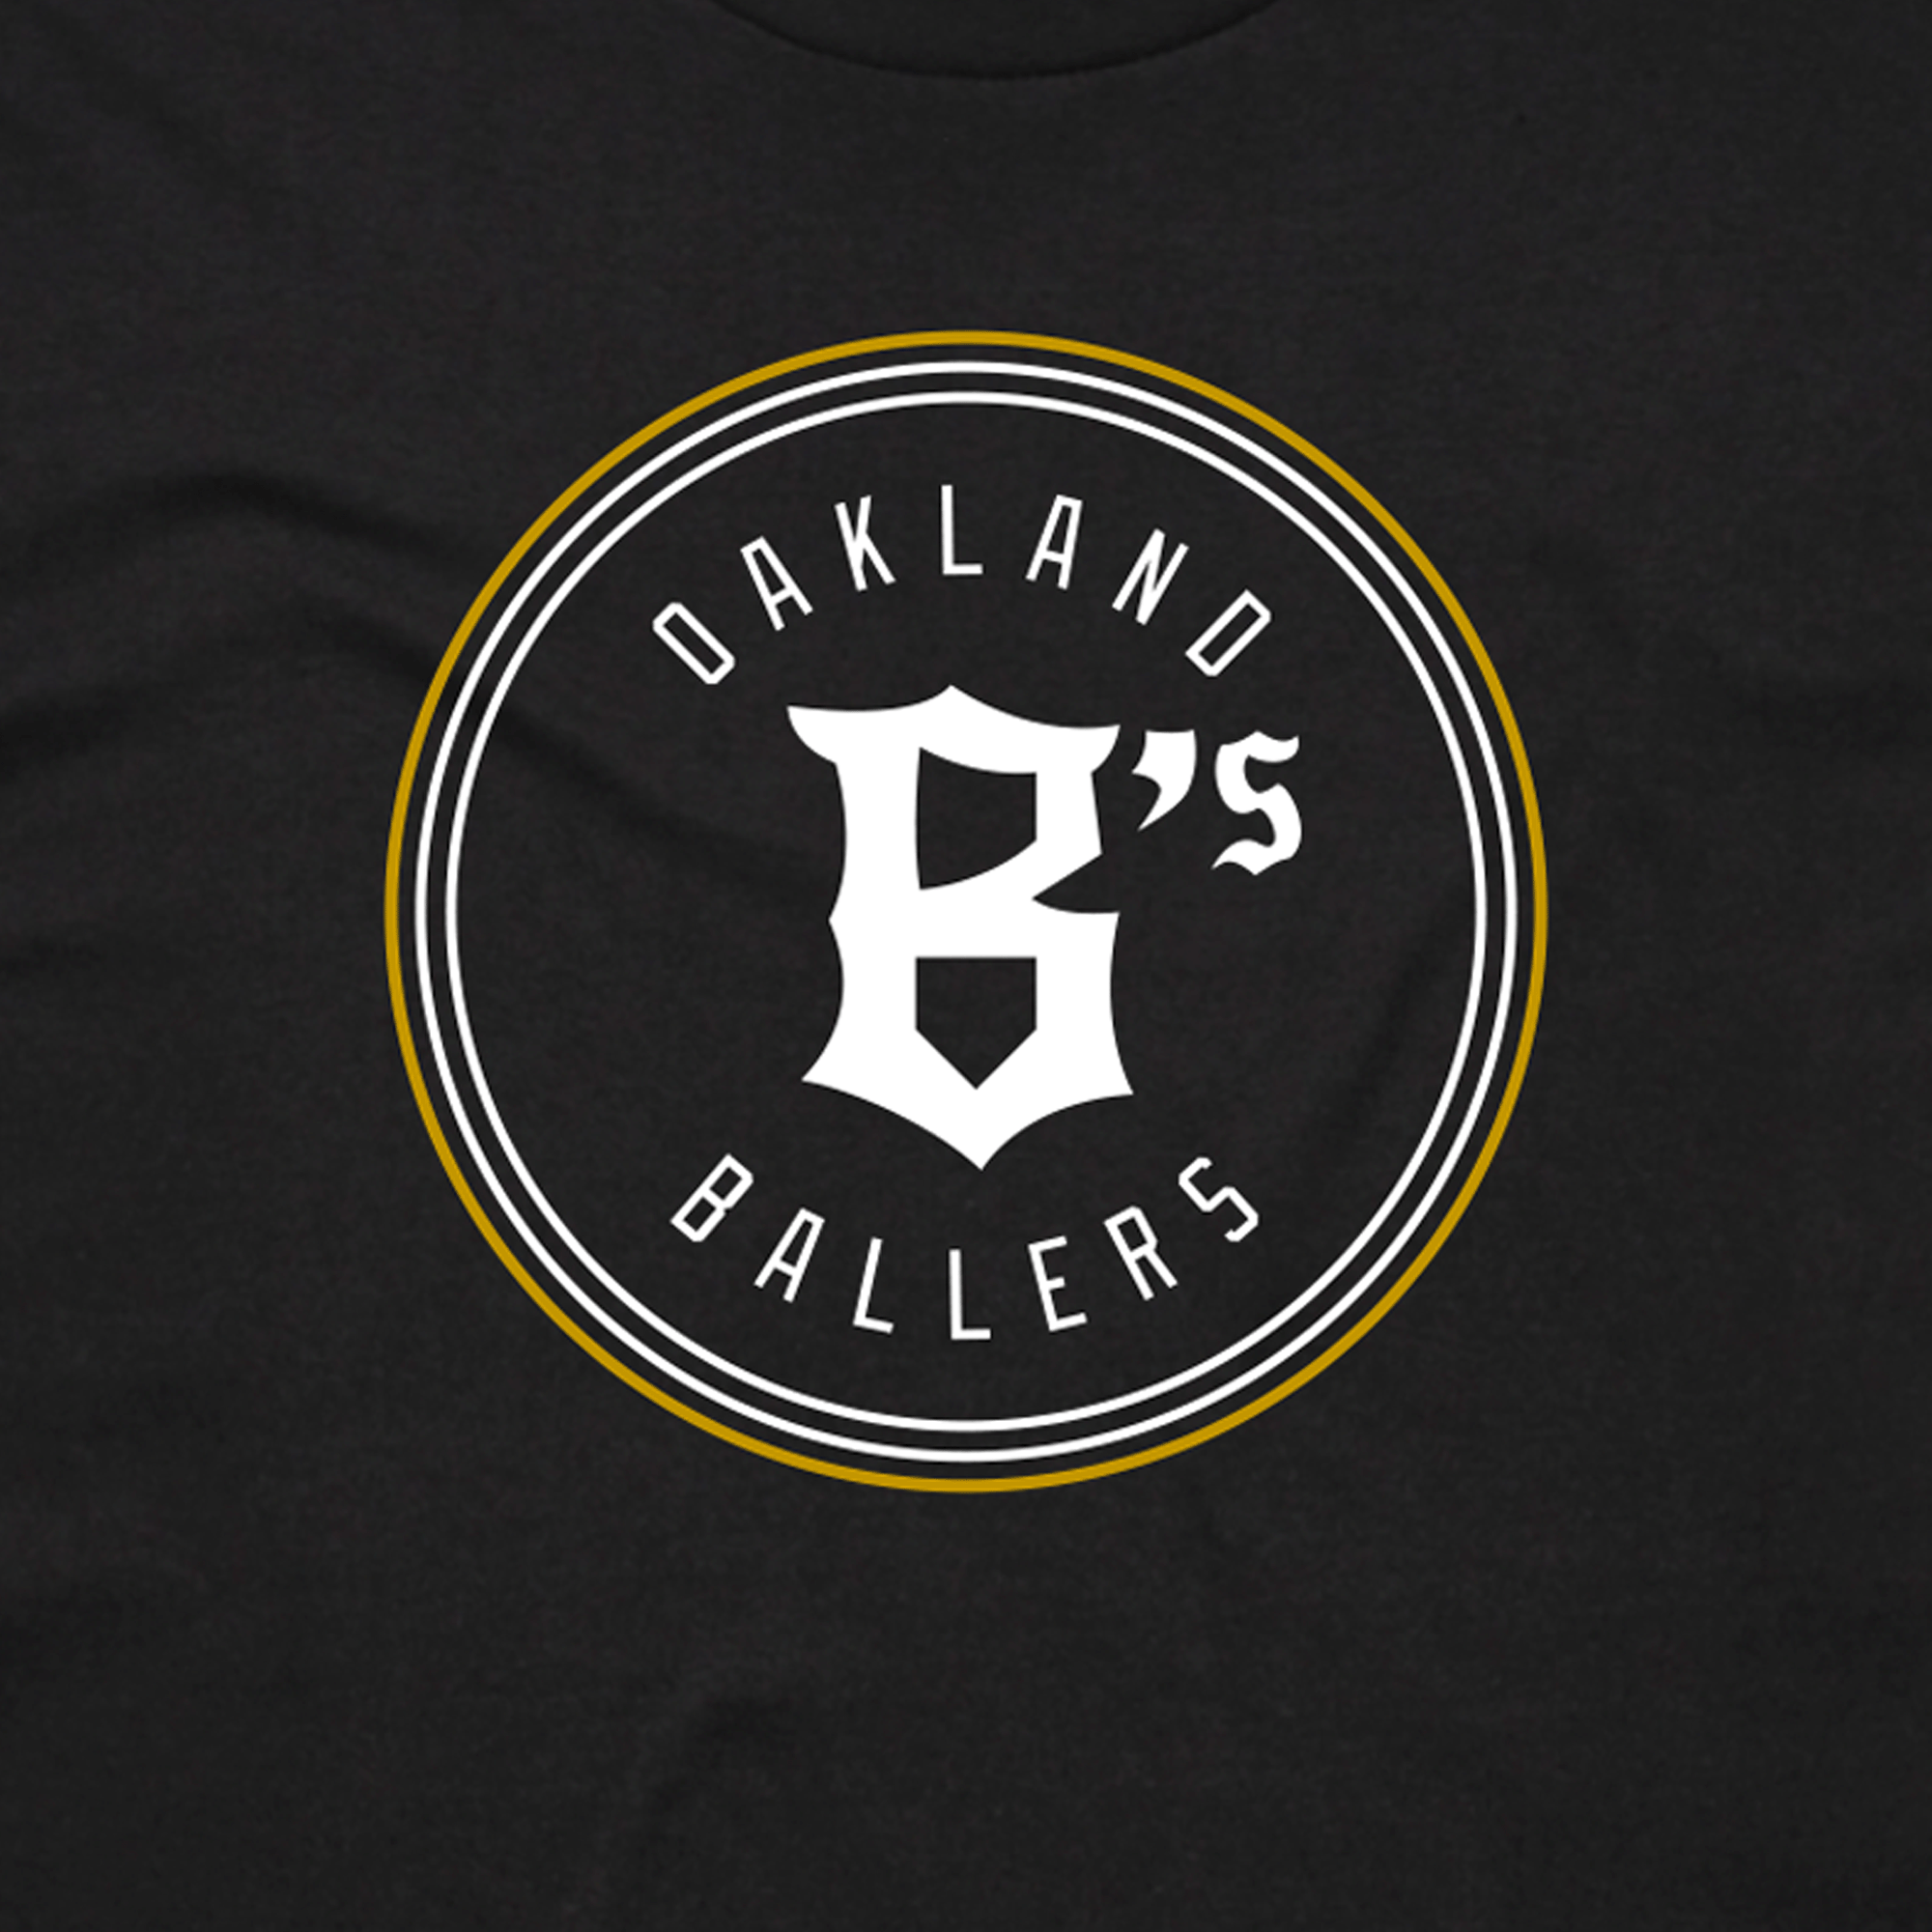 Close-up of the classic white and gold Oakland B's Ballers logo on the chest of a black t-shirt.